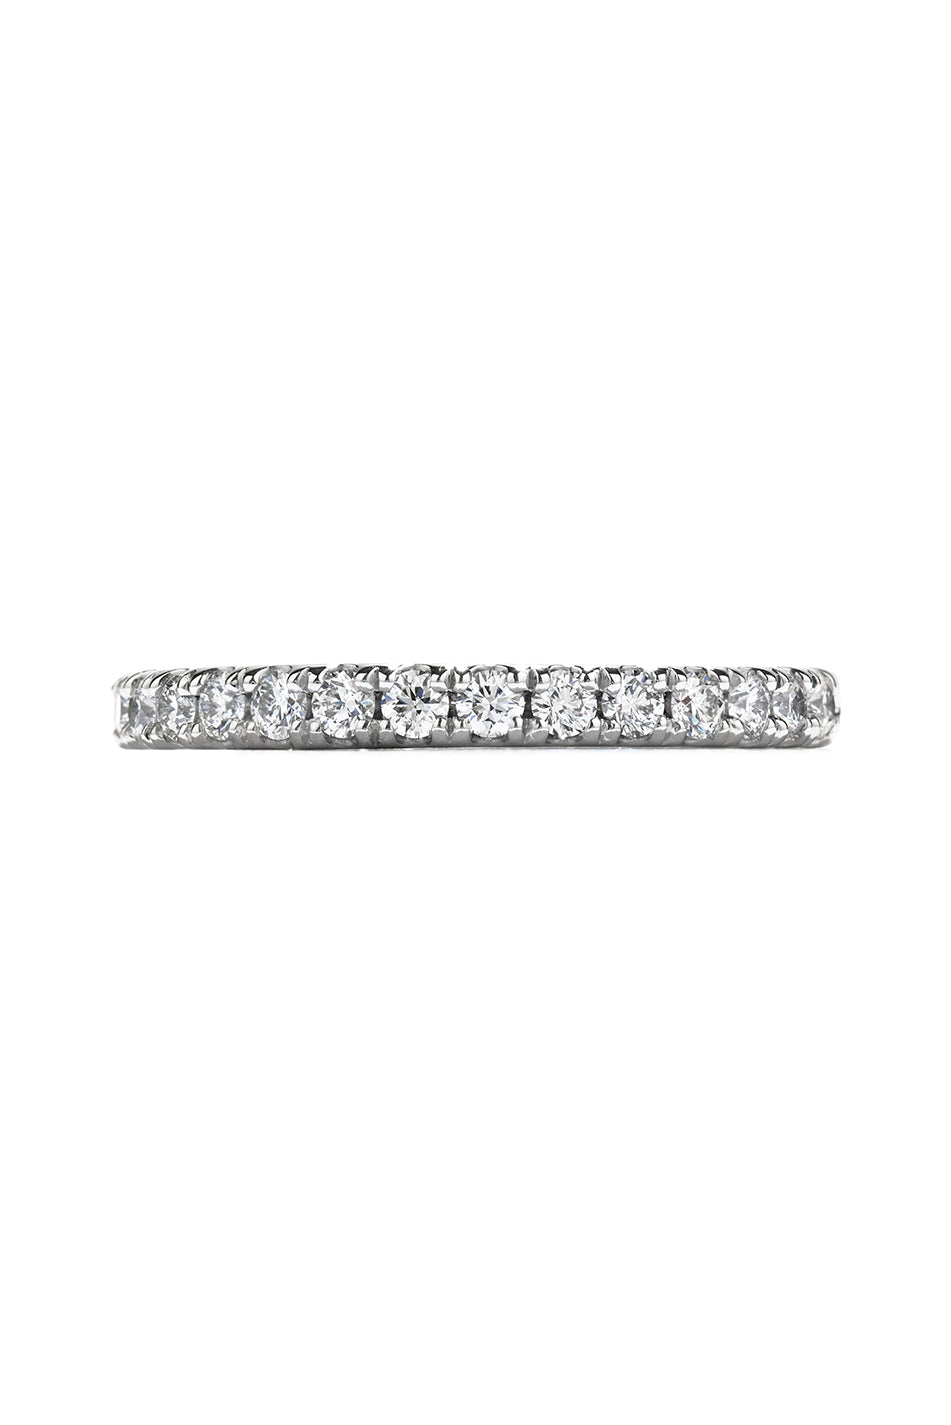 Acclaim Diamond Band From Hearts On Fire available at LeGassick Diamonds and Jewellery Gold Coast, Australia.